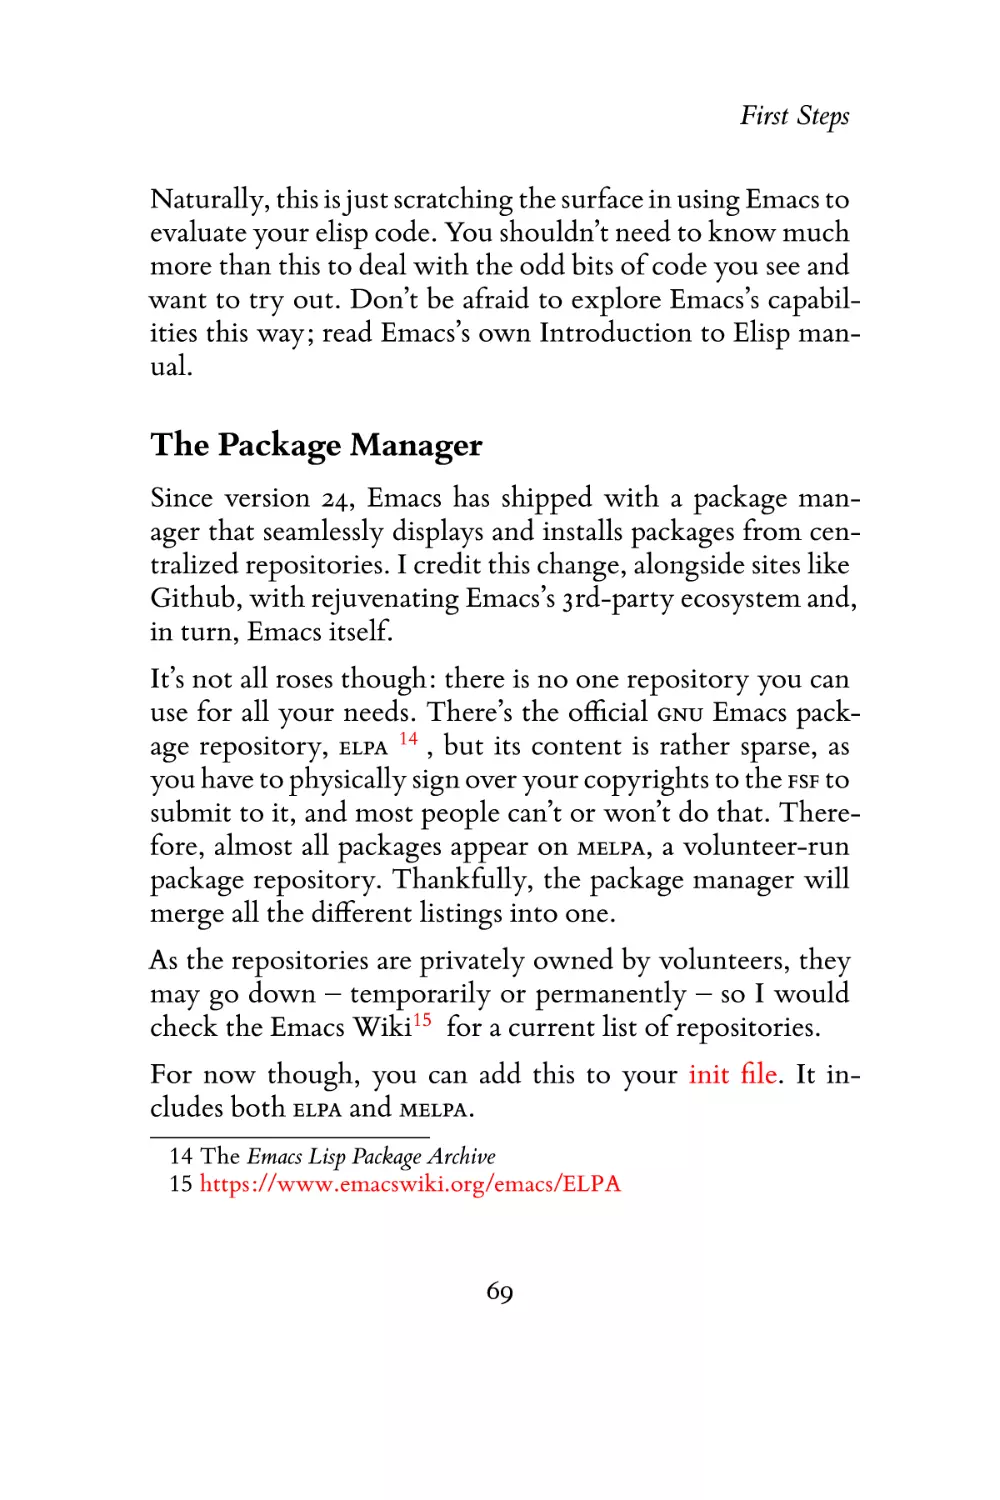 The Package Manager